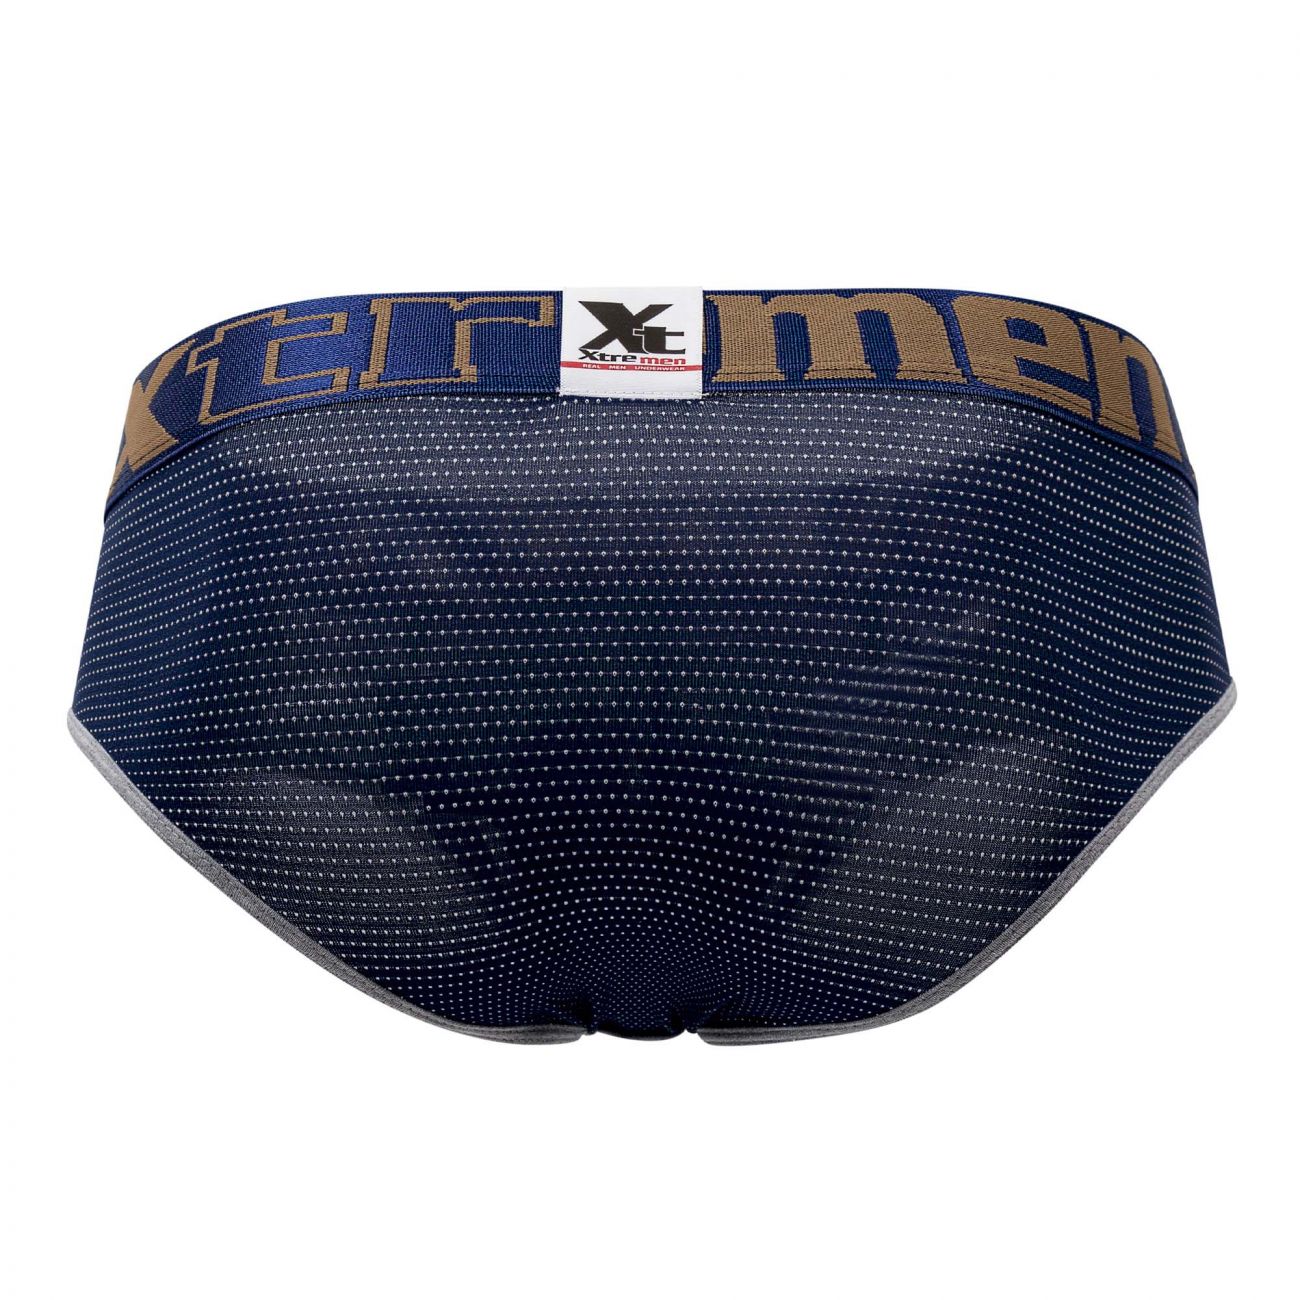 Xtremen Athletic Piping Briefs